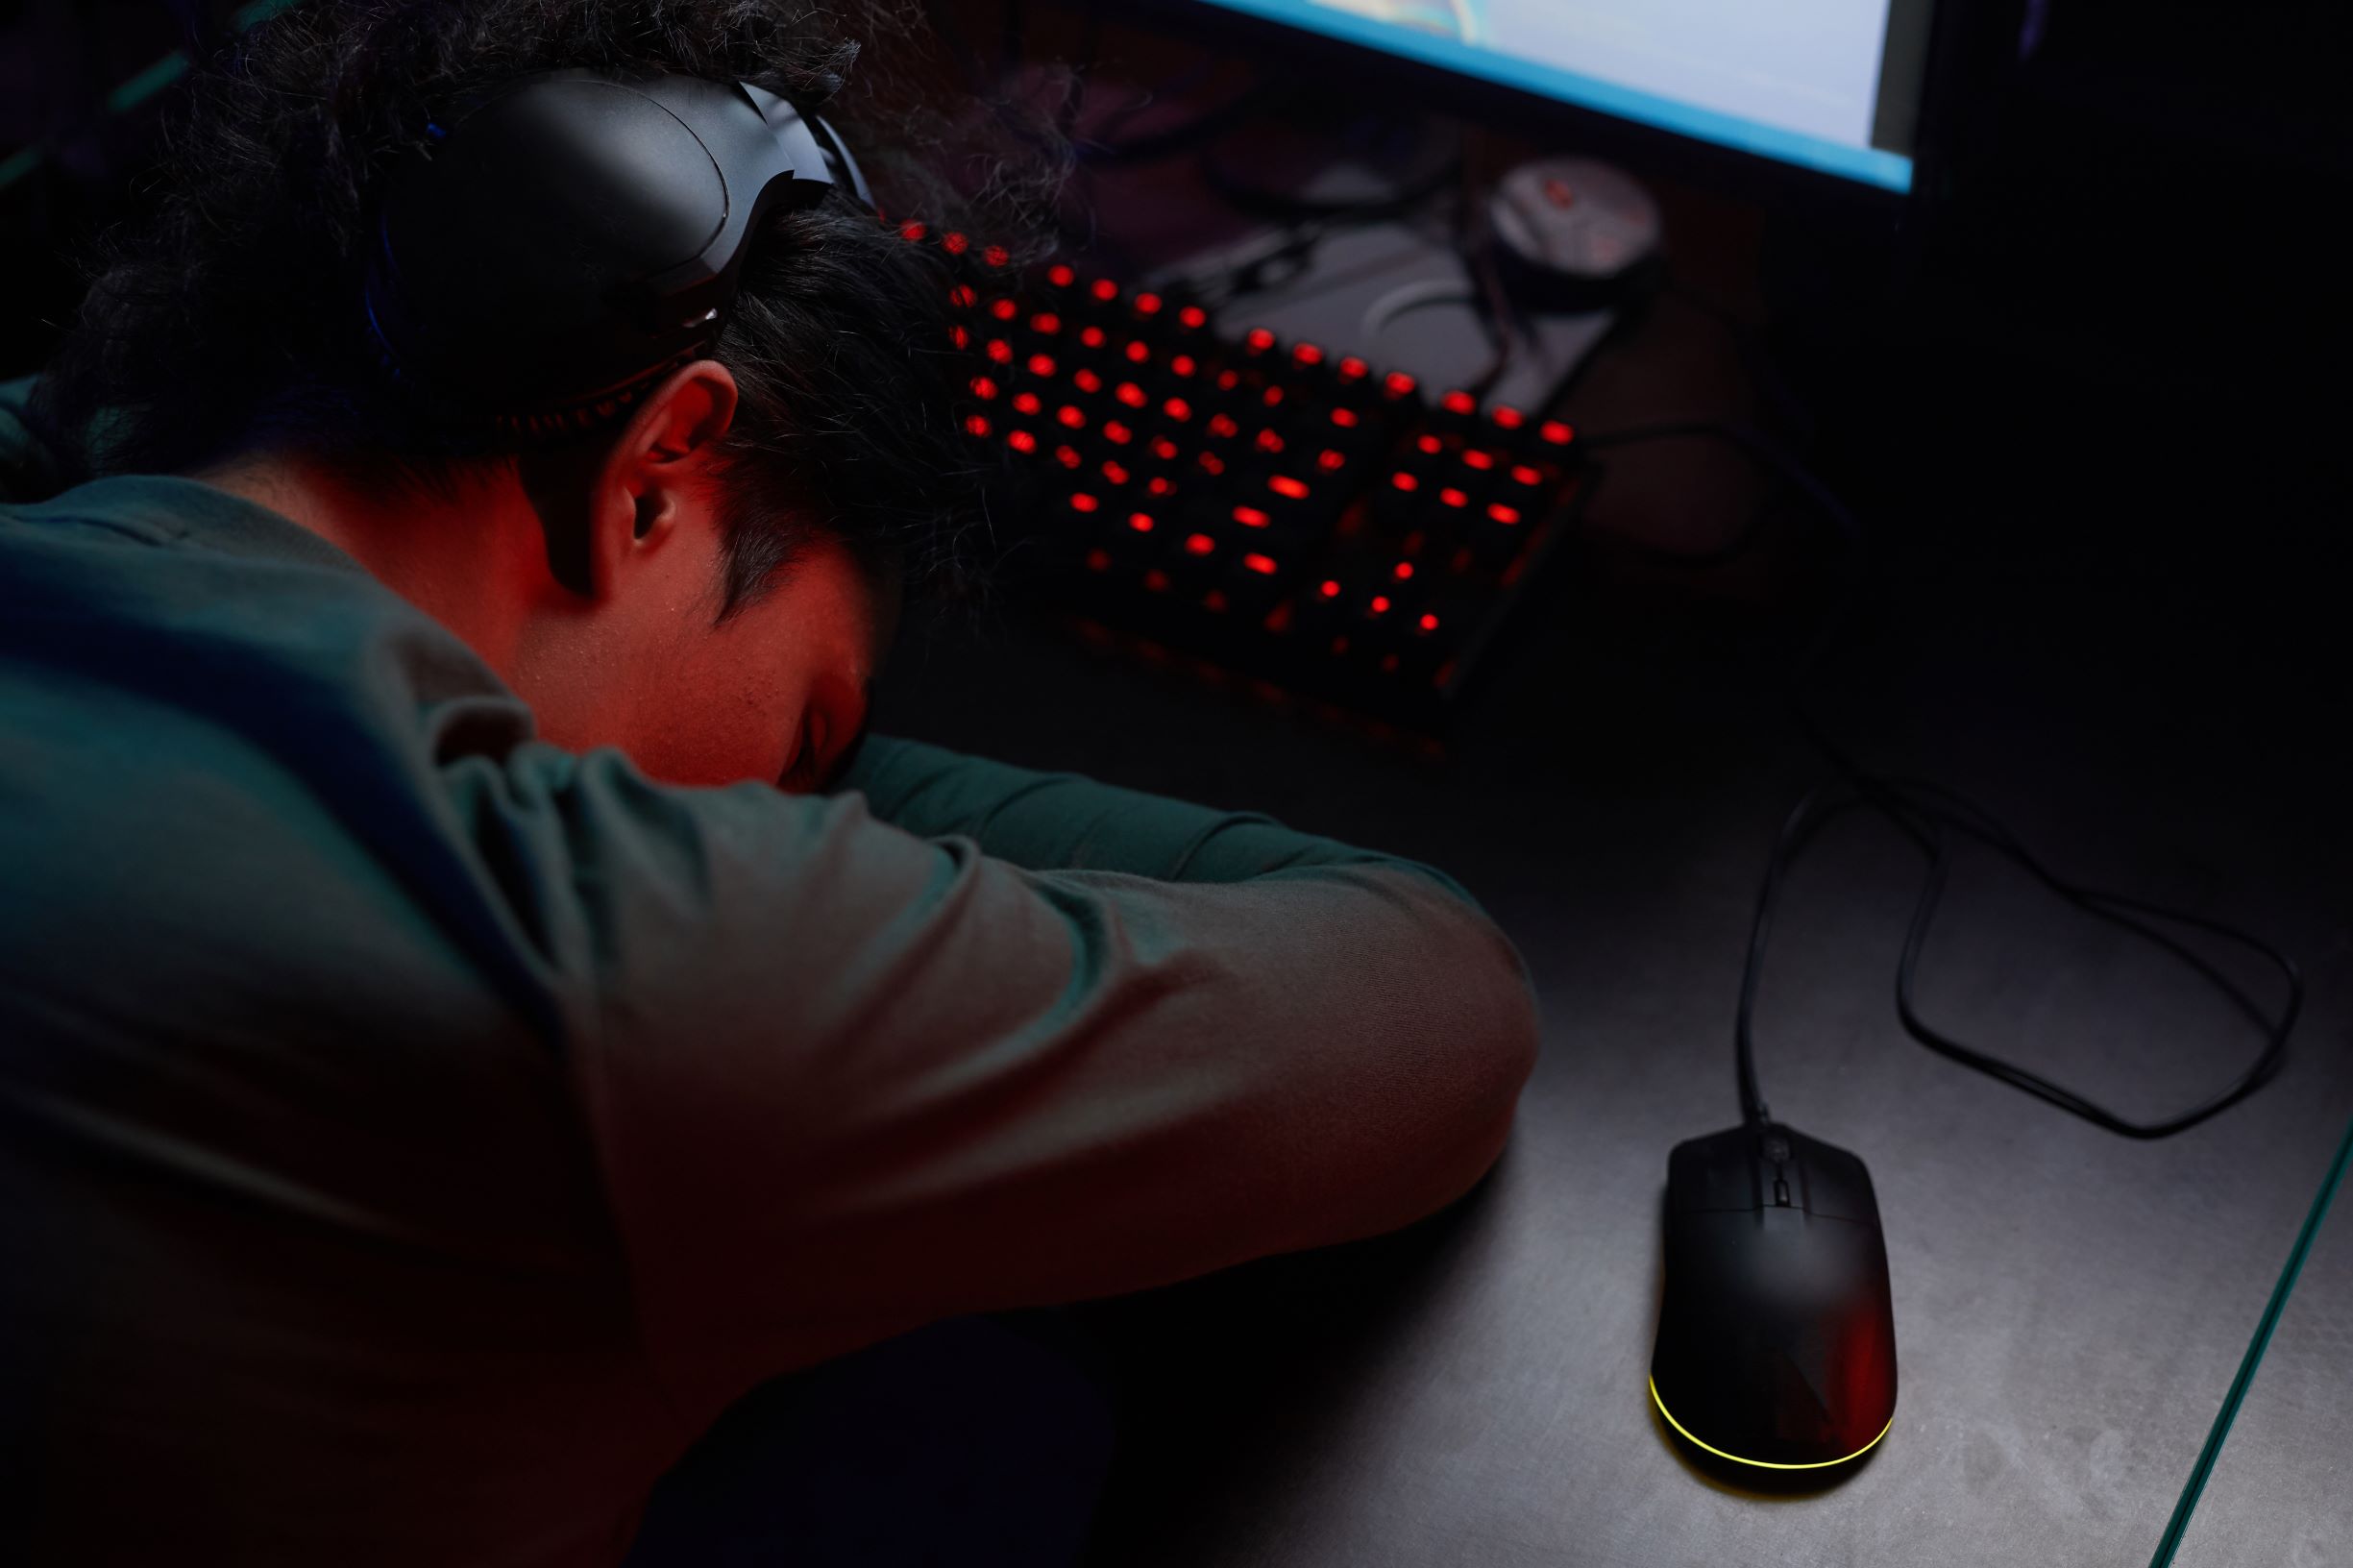 gamer sleeping at the table KLFMHN6 9e9bd